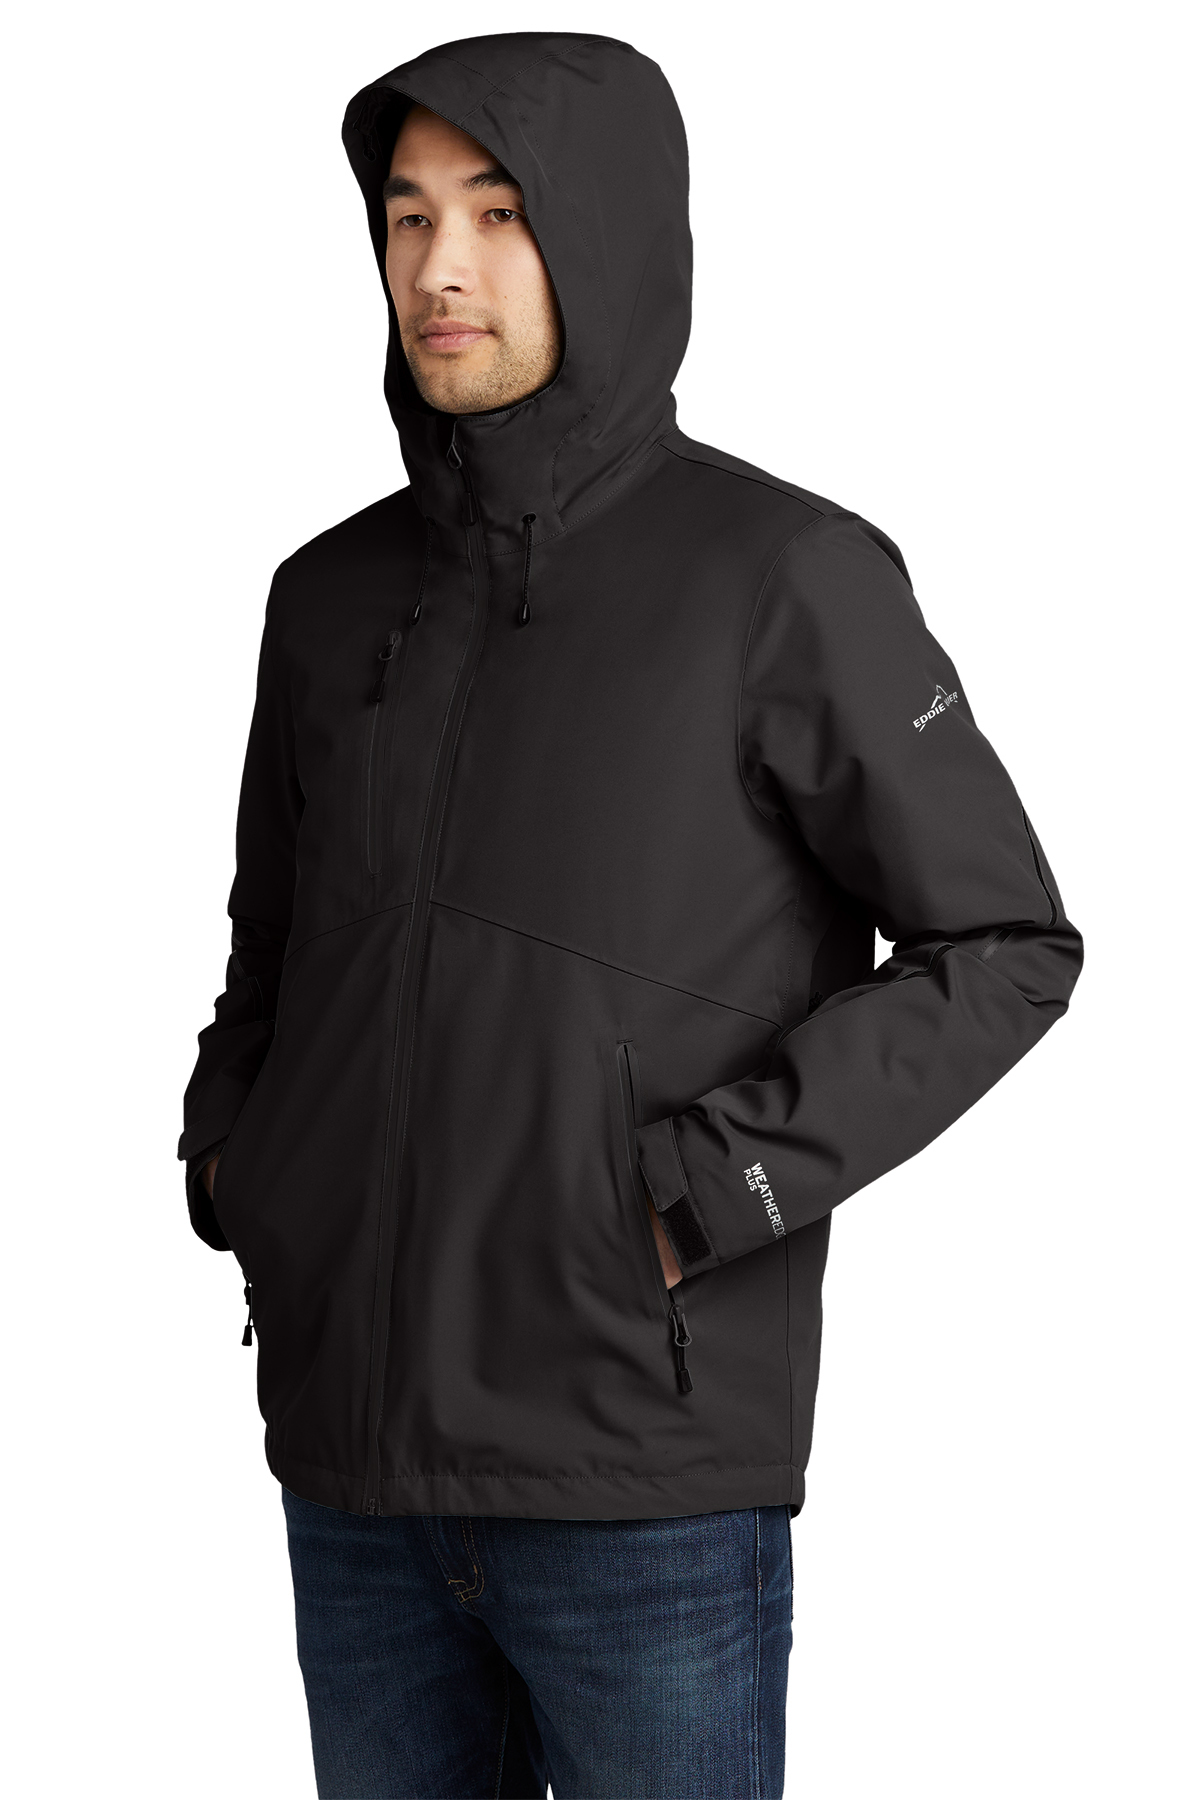 Eddie Bauer WeatherEdge Plus 3-in-1 Jacket | Product | Company Casuals